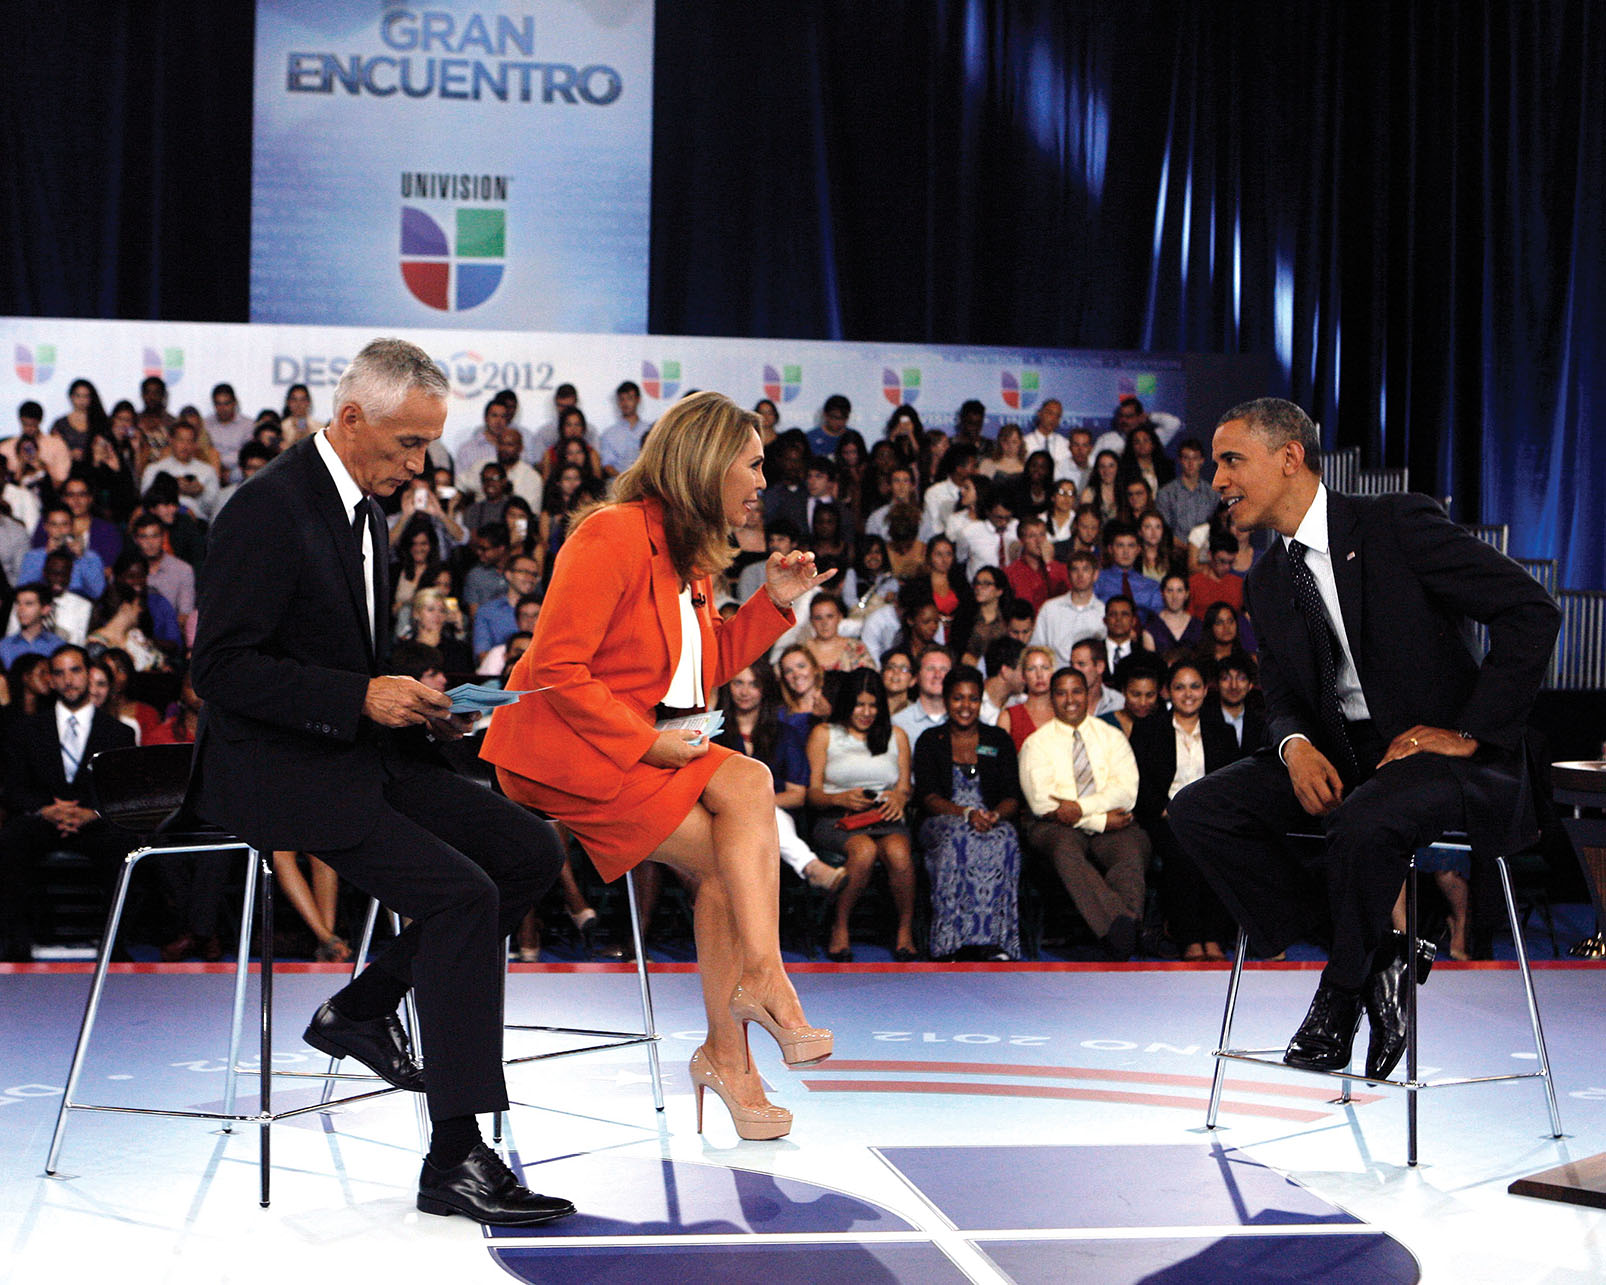 President Barack Obama on stage being interviewed by Univision’s national anchors, Jorge Ramos and María Elena Salinas, during the 2012 campaign. (Photo by Jeffrey M. Boan/Univision.)